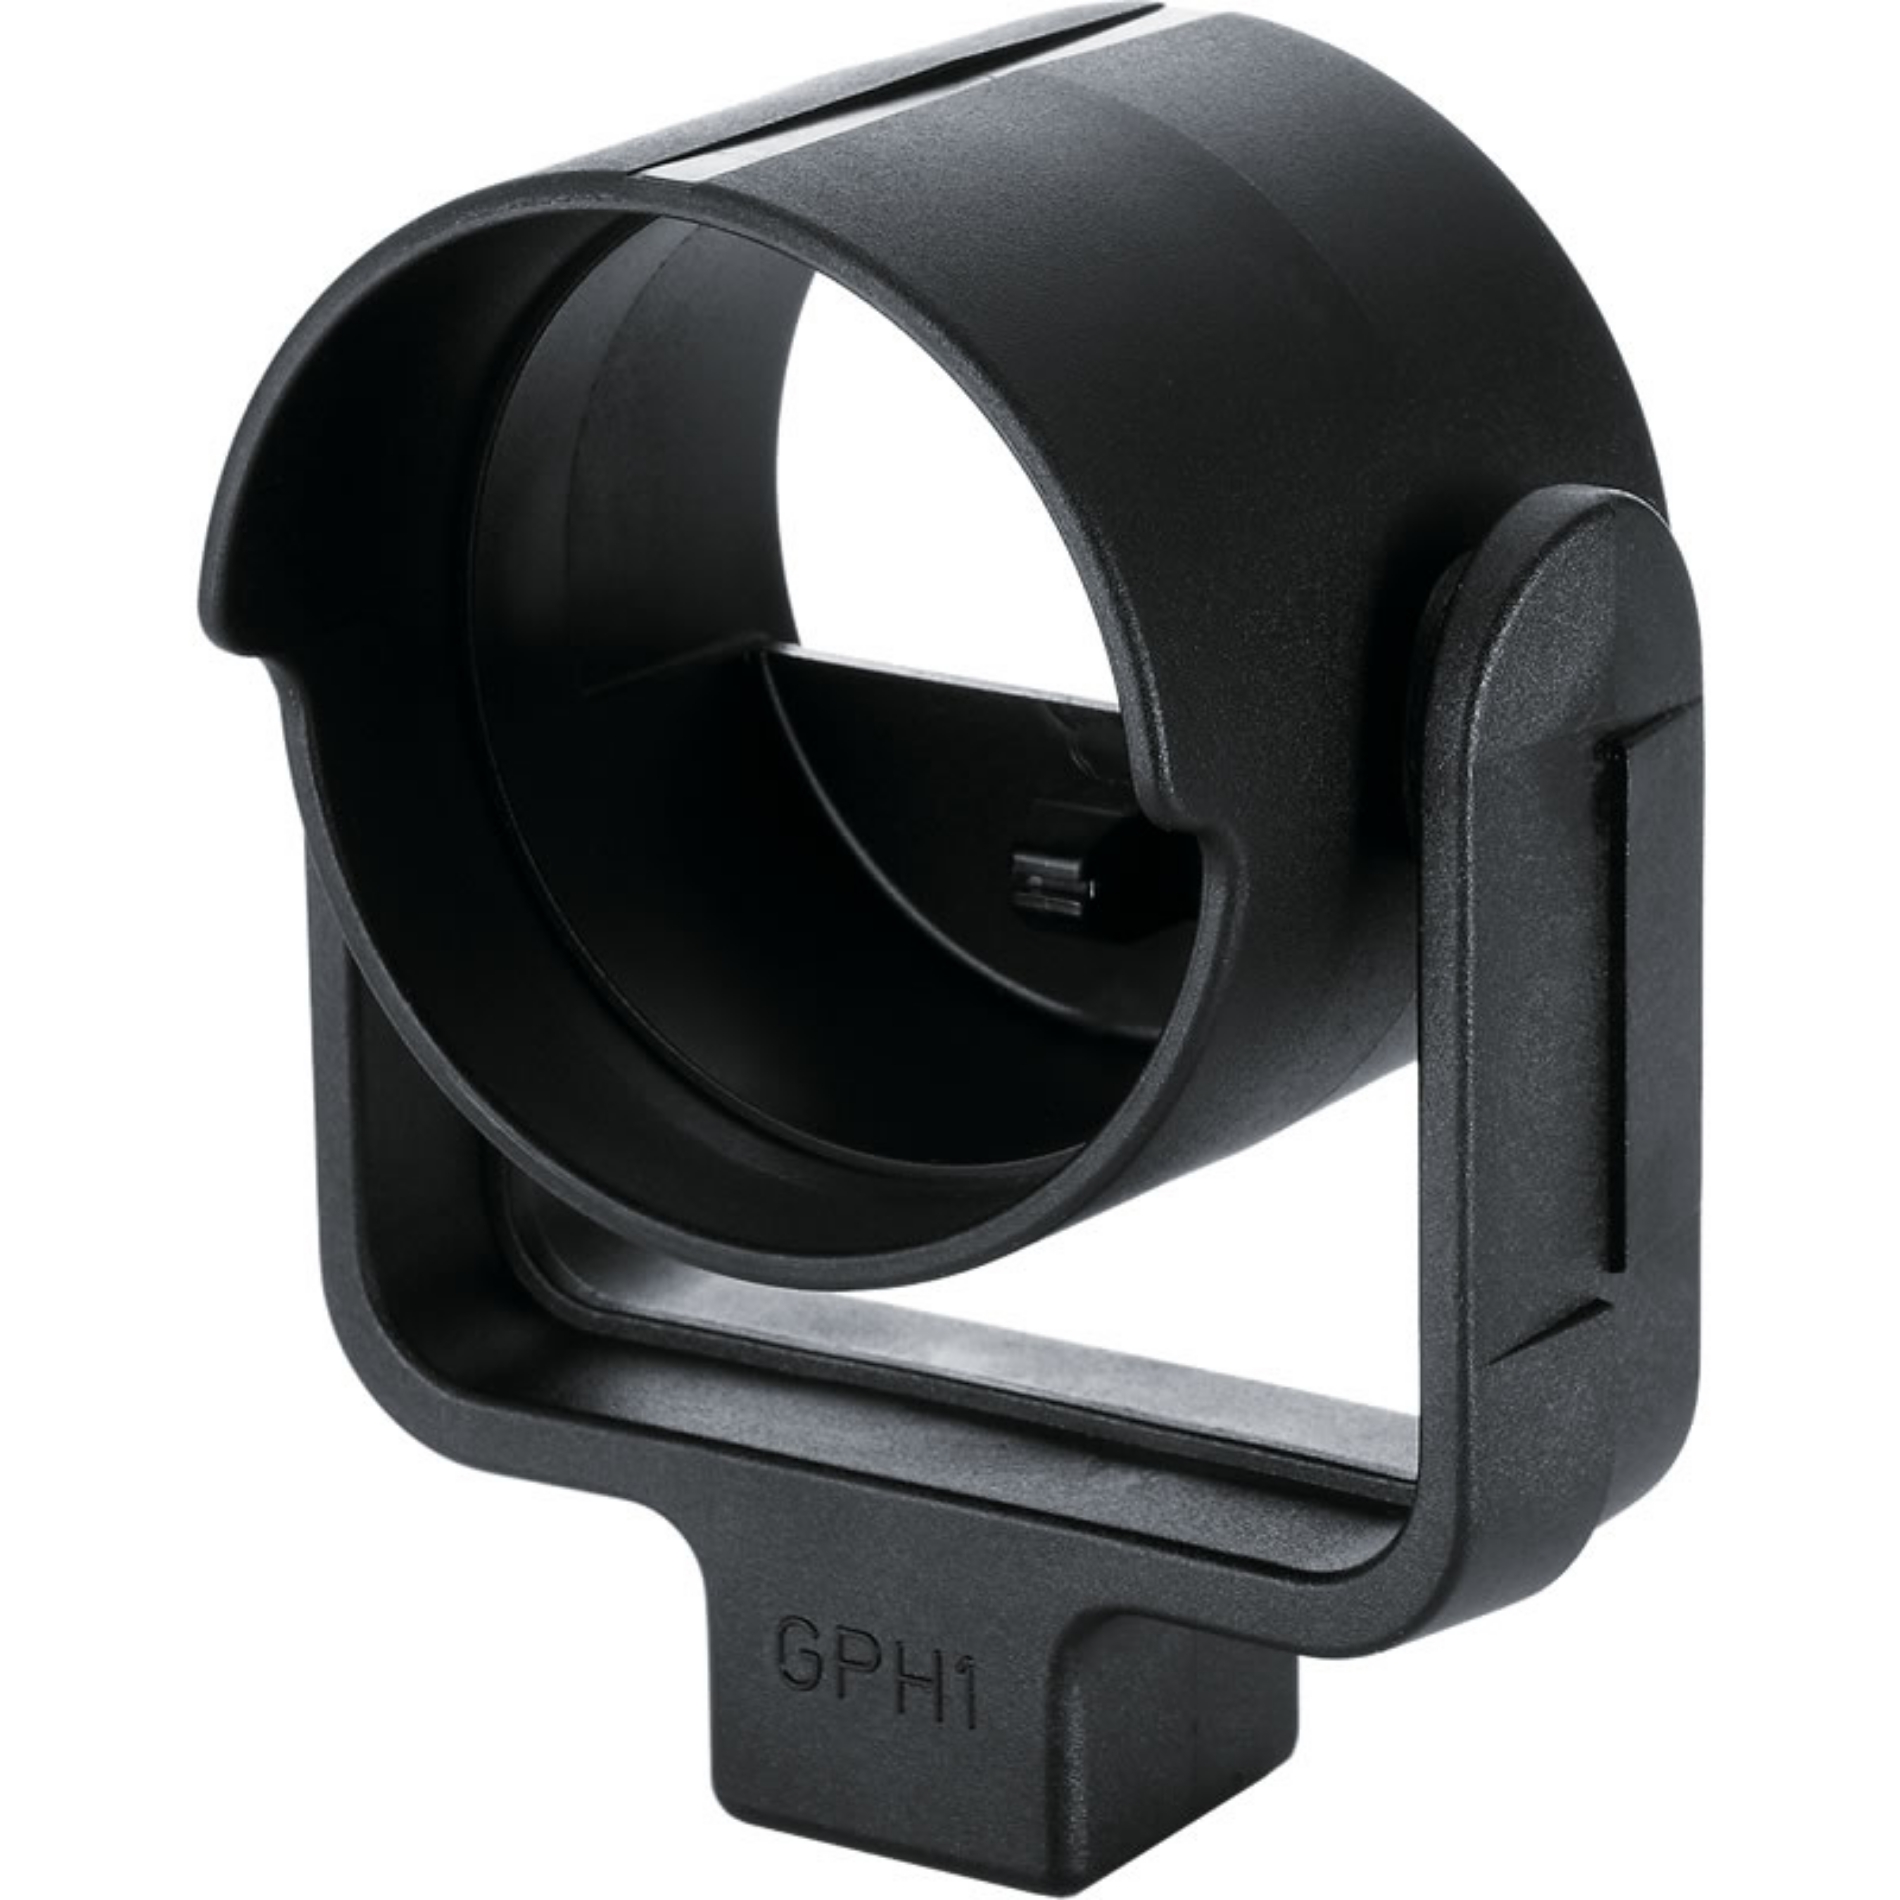 Picture of Leica GPH1 Circular Prism Holder